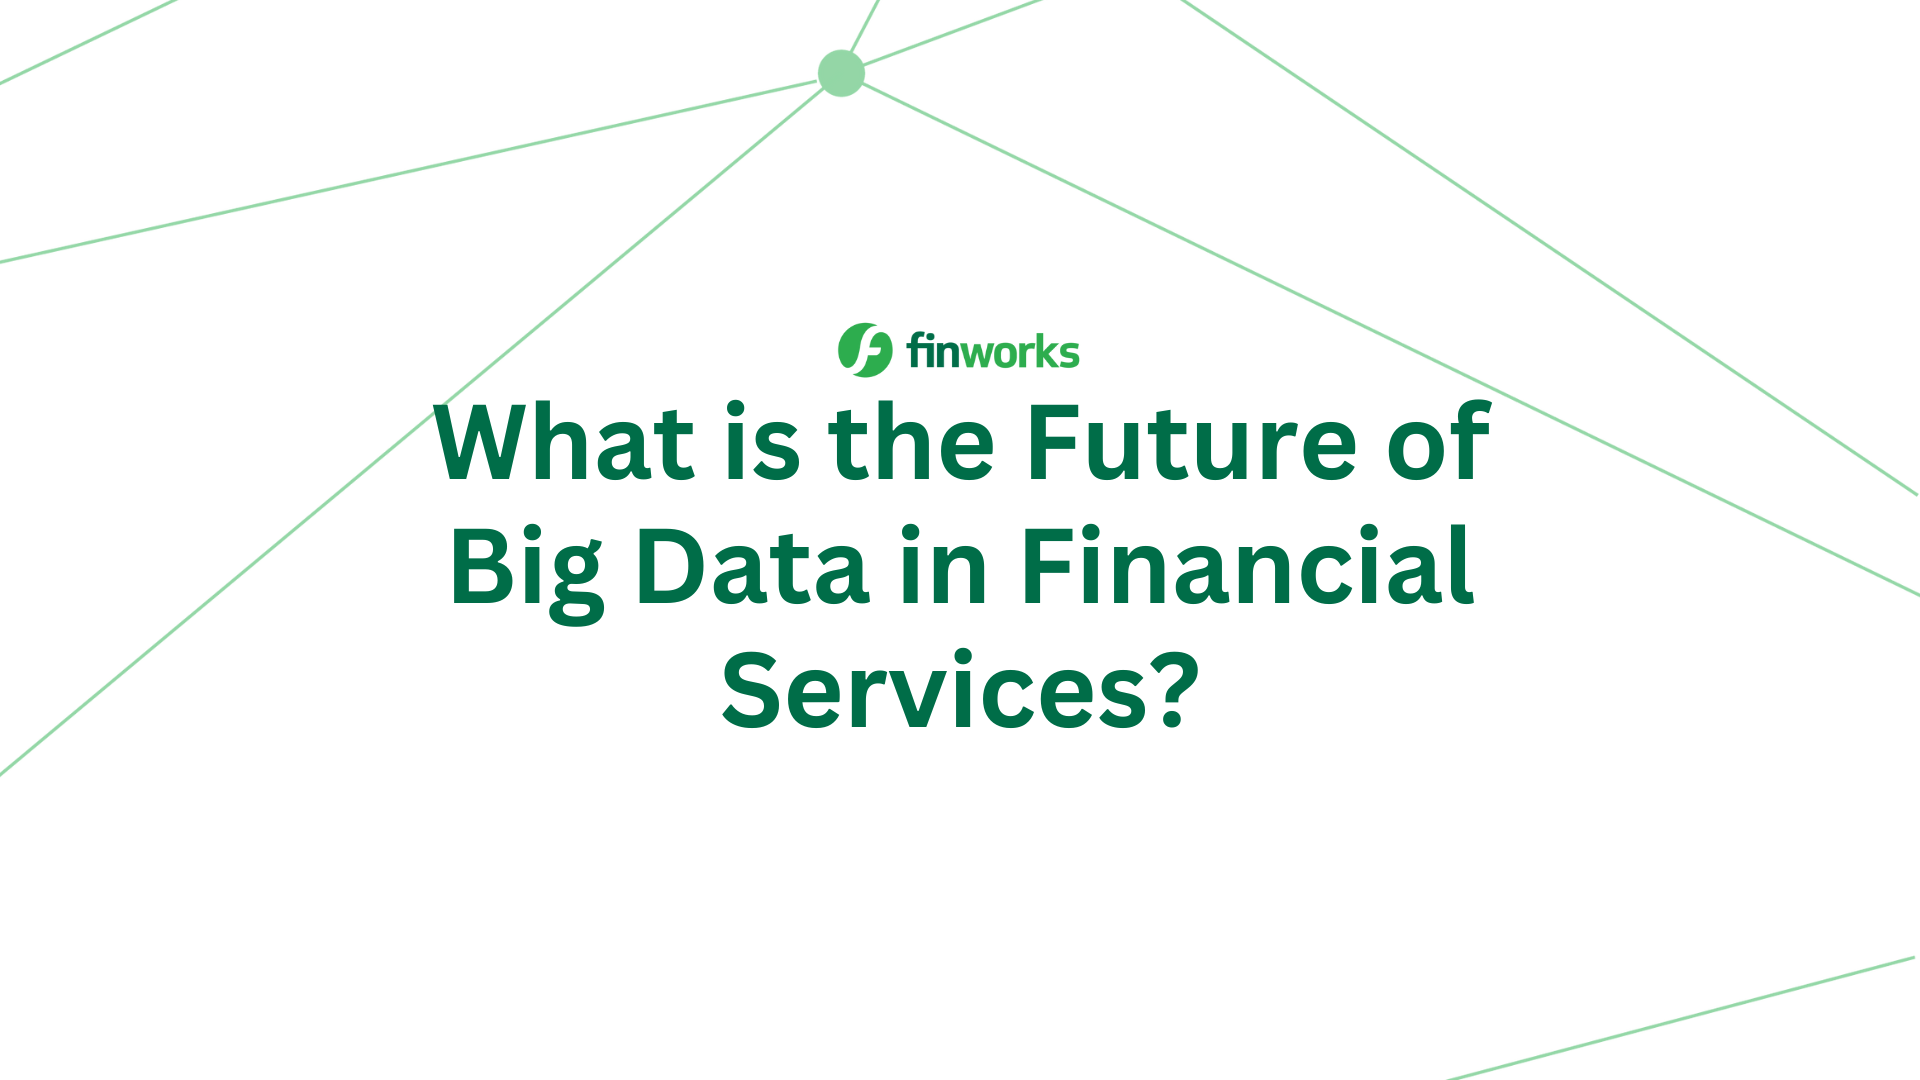 What is the Future of Big Data in Financial Services?